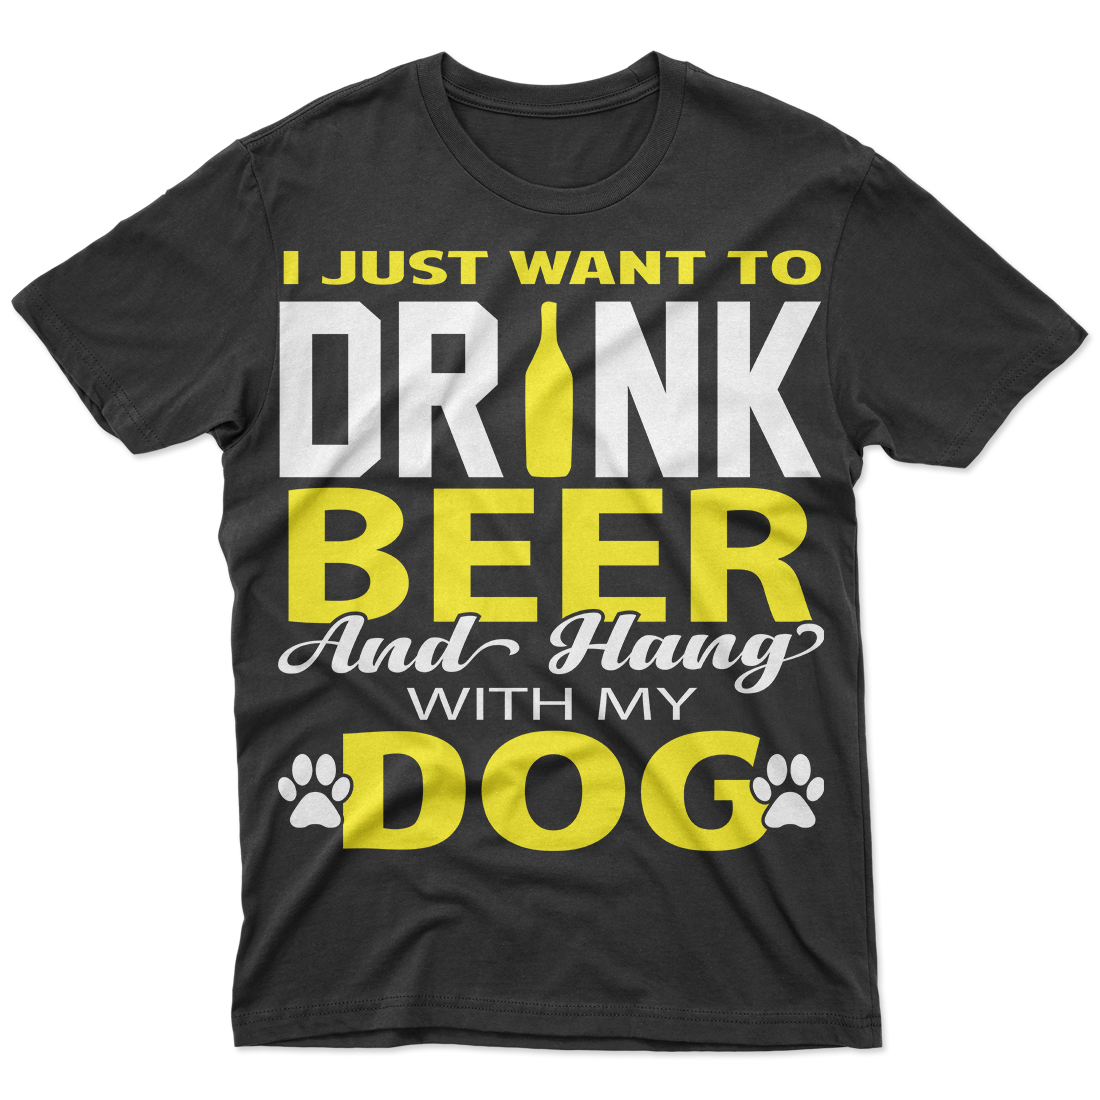 Dog typography t-shirt design pinterest preview image.